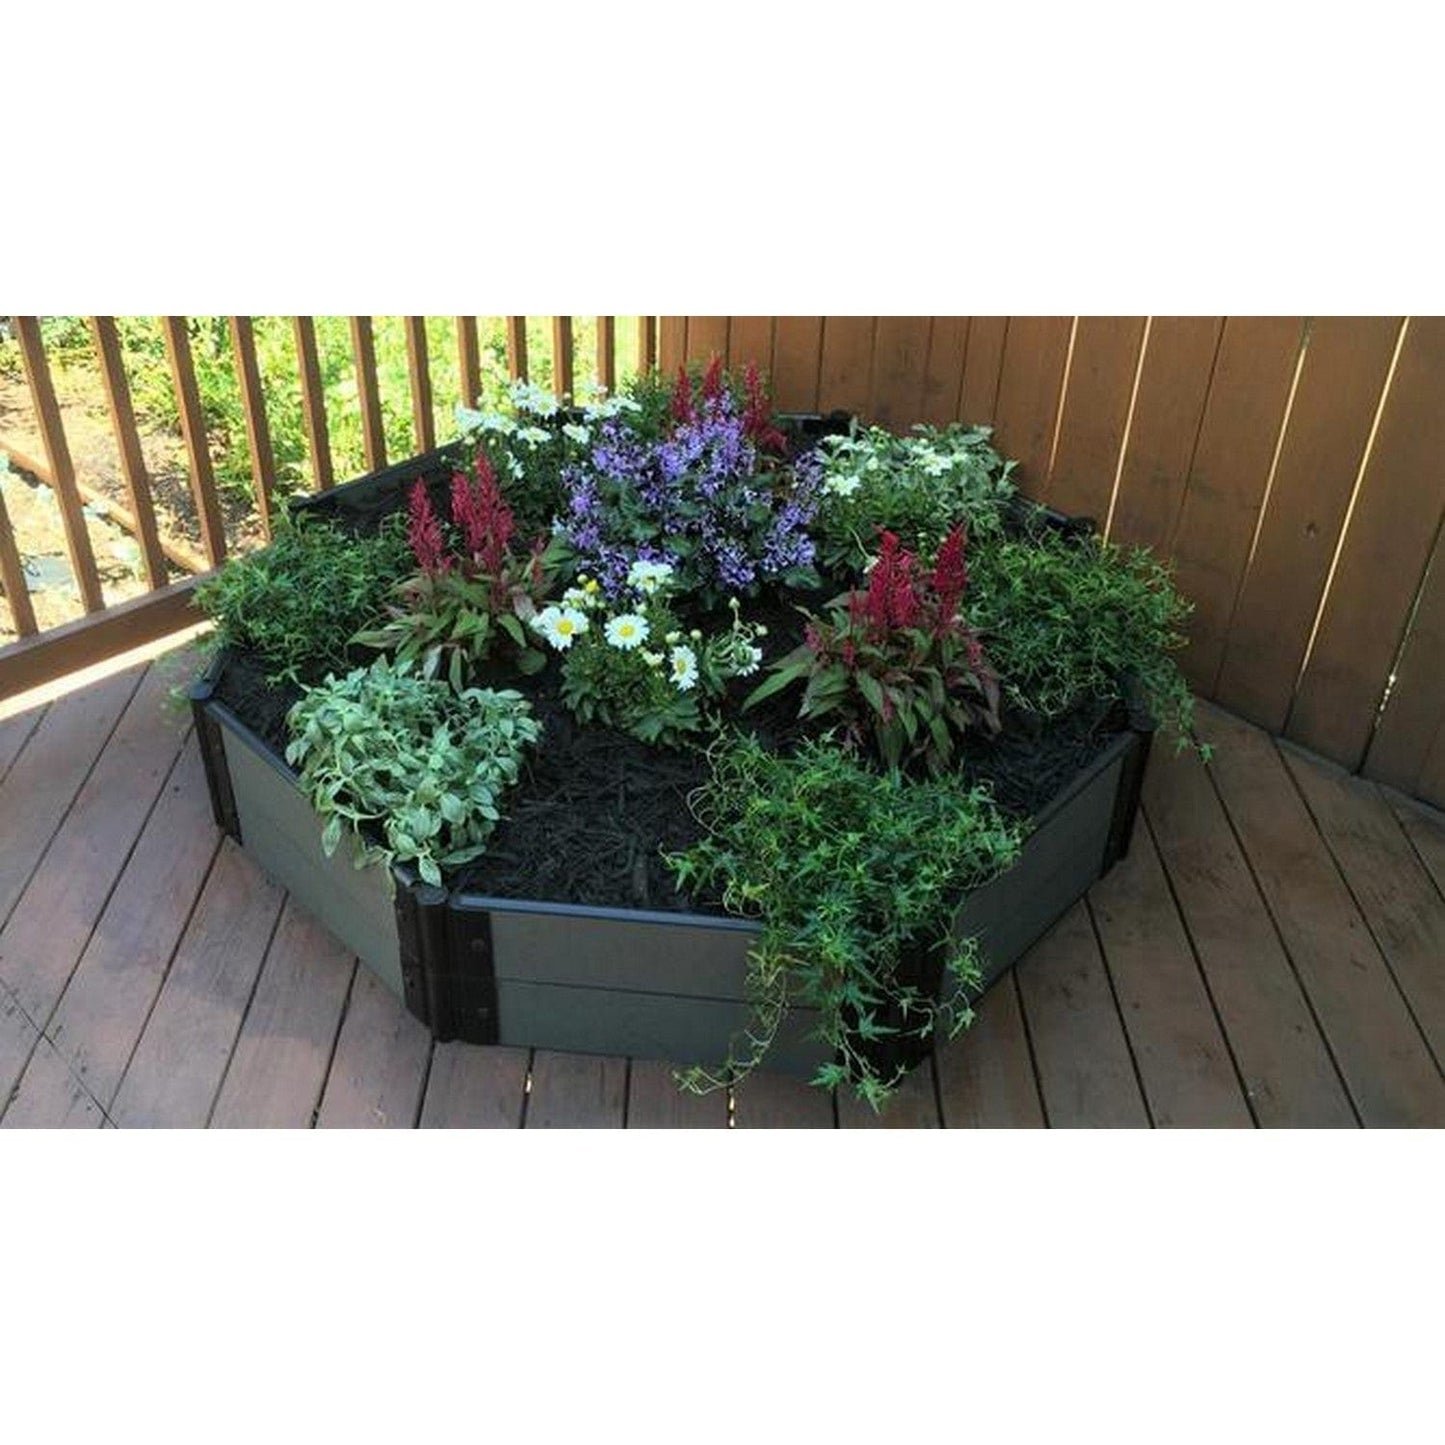 Frame It All Gardening Accessories Frame It All | Tool-Free St. John Baptistry Raised Garden Bed (Octagon) 5' X 5' X 22" - Uptown Brown - 1" Profile 200004461